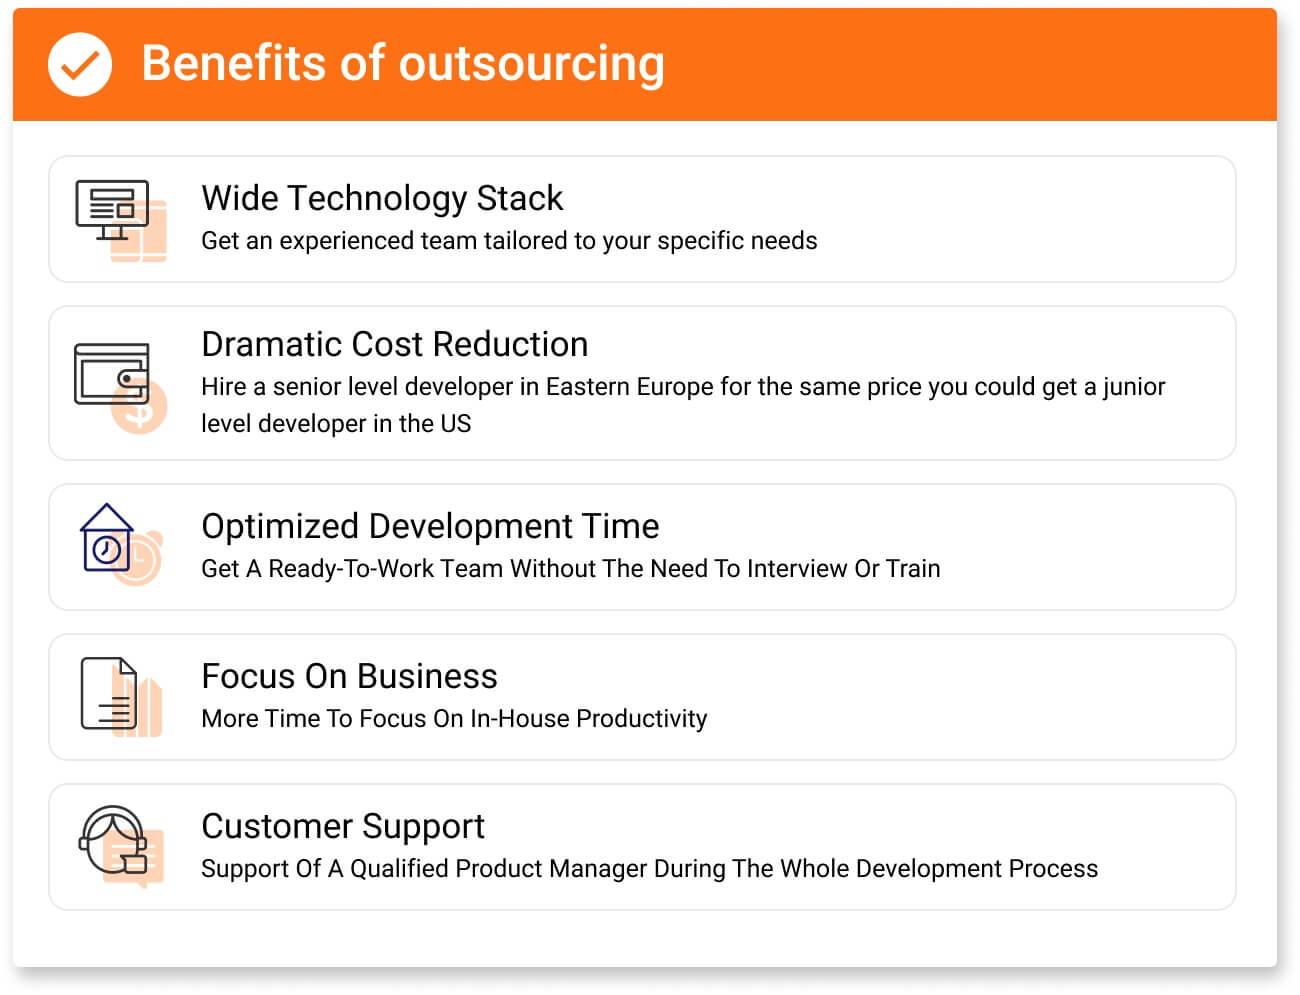 Benefits Of Outsourcing: Outsource Your Business App Needs